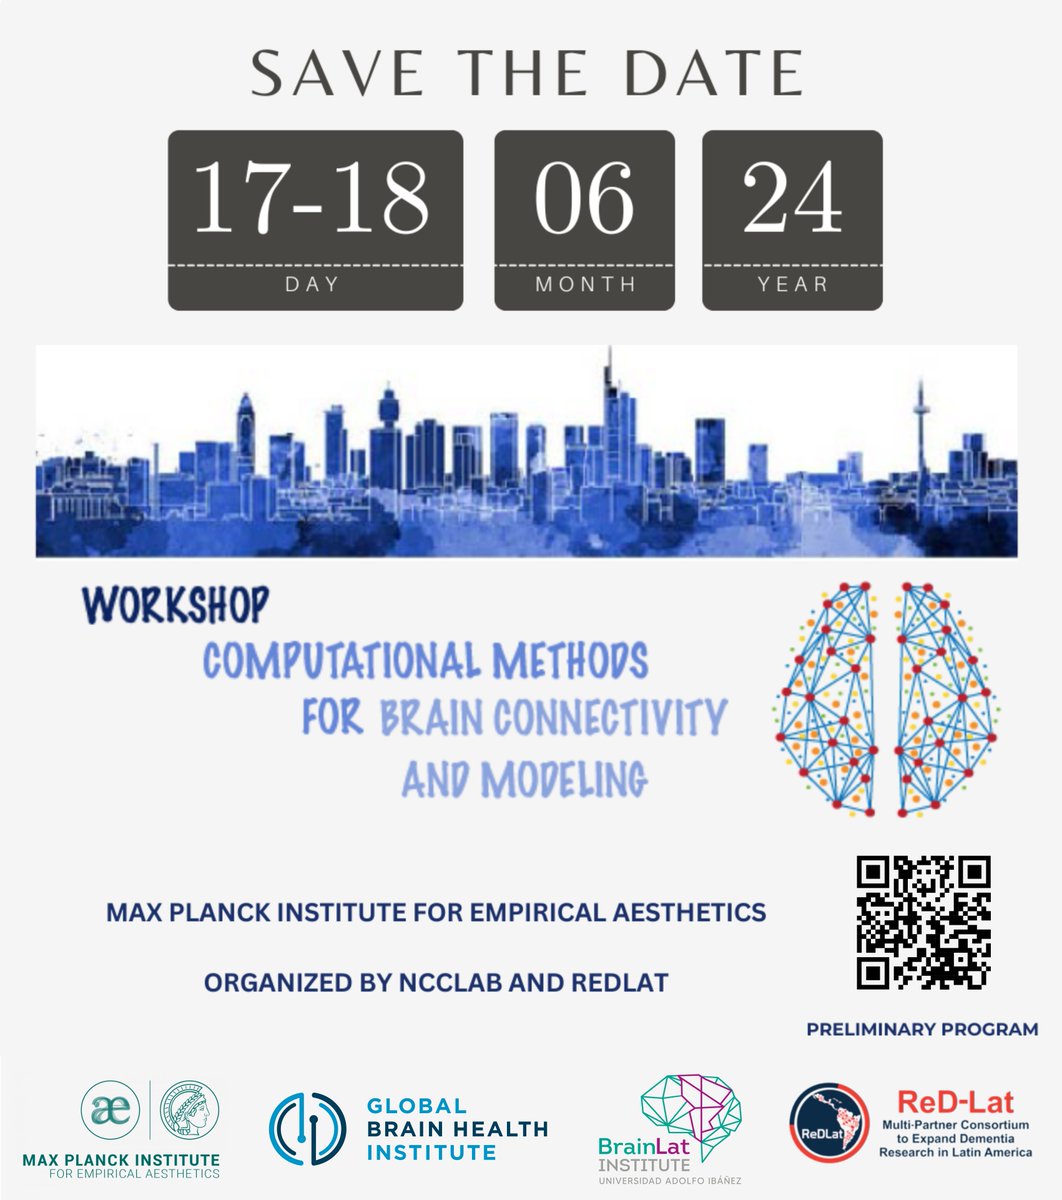 #AltanticFellows Carlos Coronel, Lucía Pertierra @AgustinMIbanez & colleagues are pleased to announce the 'Computational Methods for Brain Connectivity Modeling' workshop taking place @MPI_ae & online on 17-18 June. Registration now open! ncclabmpi.github.io/comp_neuro_wor…